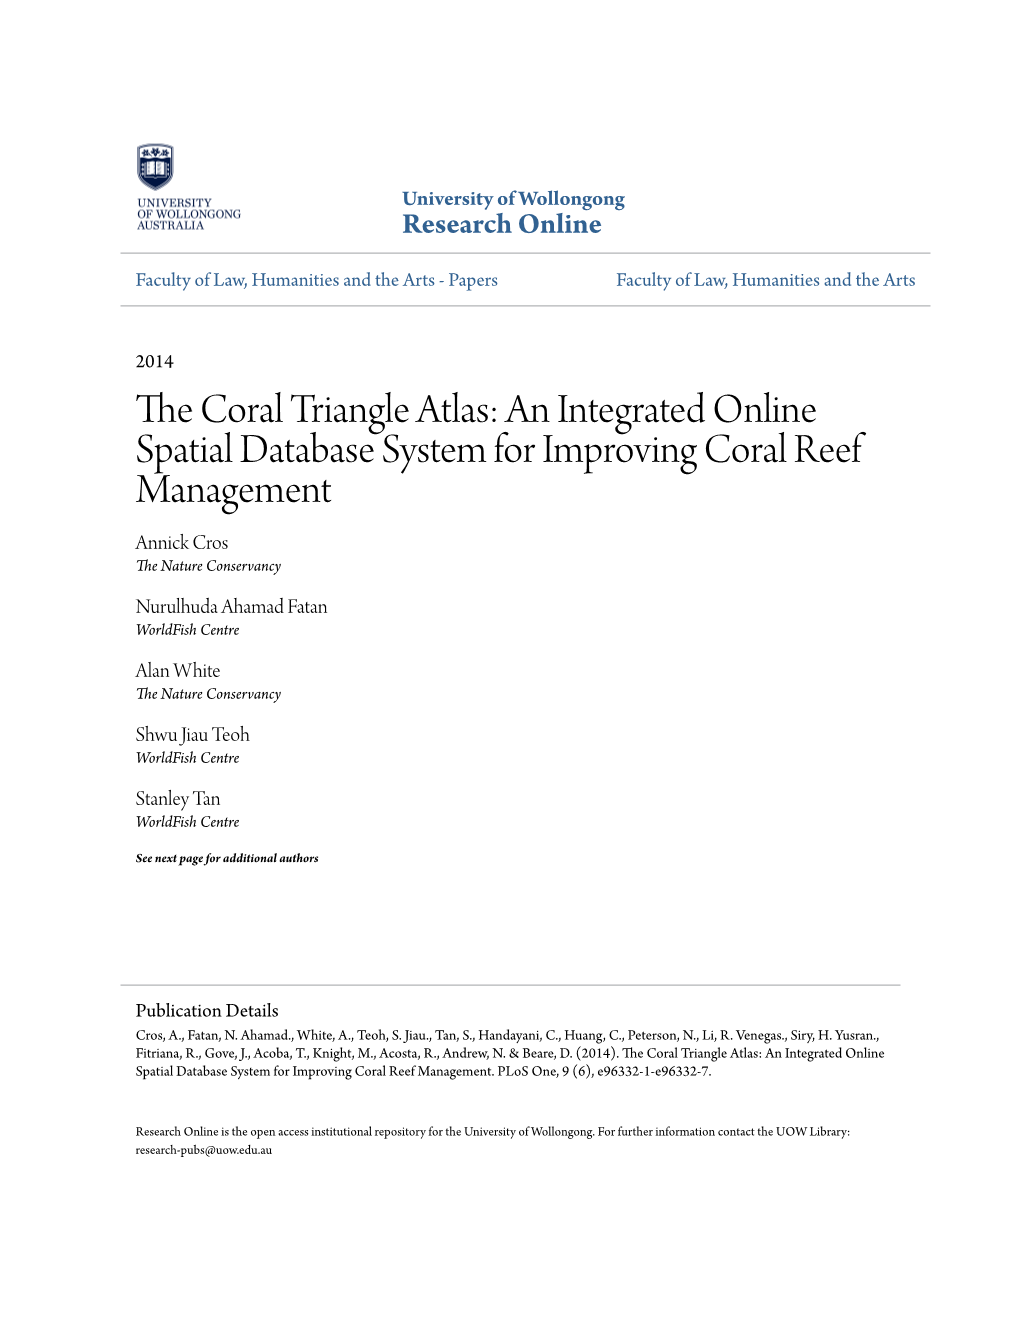 The Coral Triangle Atlas: an Integrated Online Spatial Database System for Improving Coral Reef Management